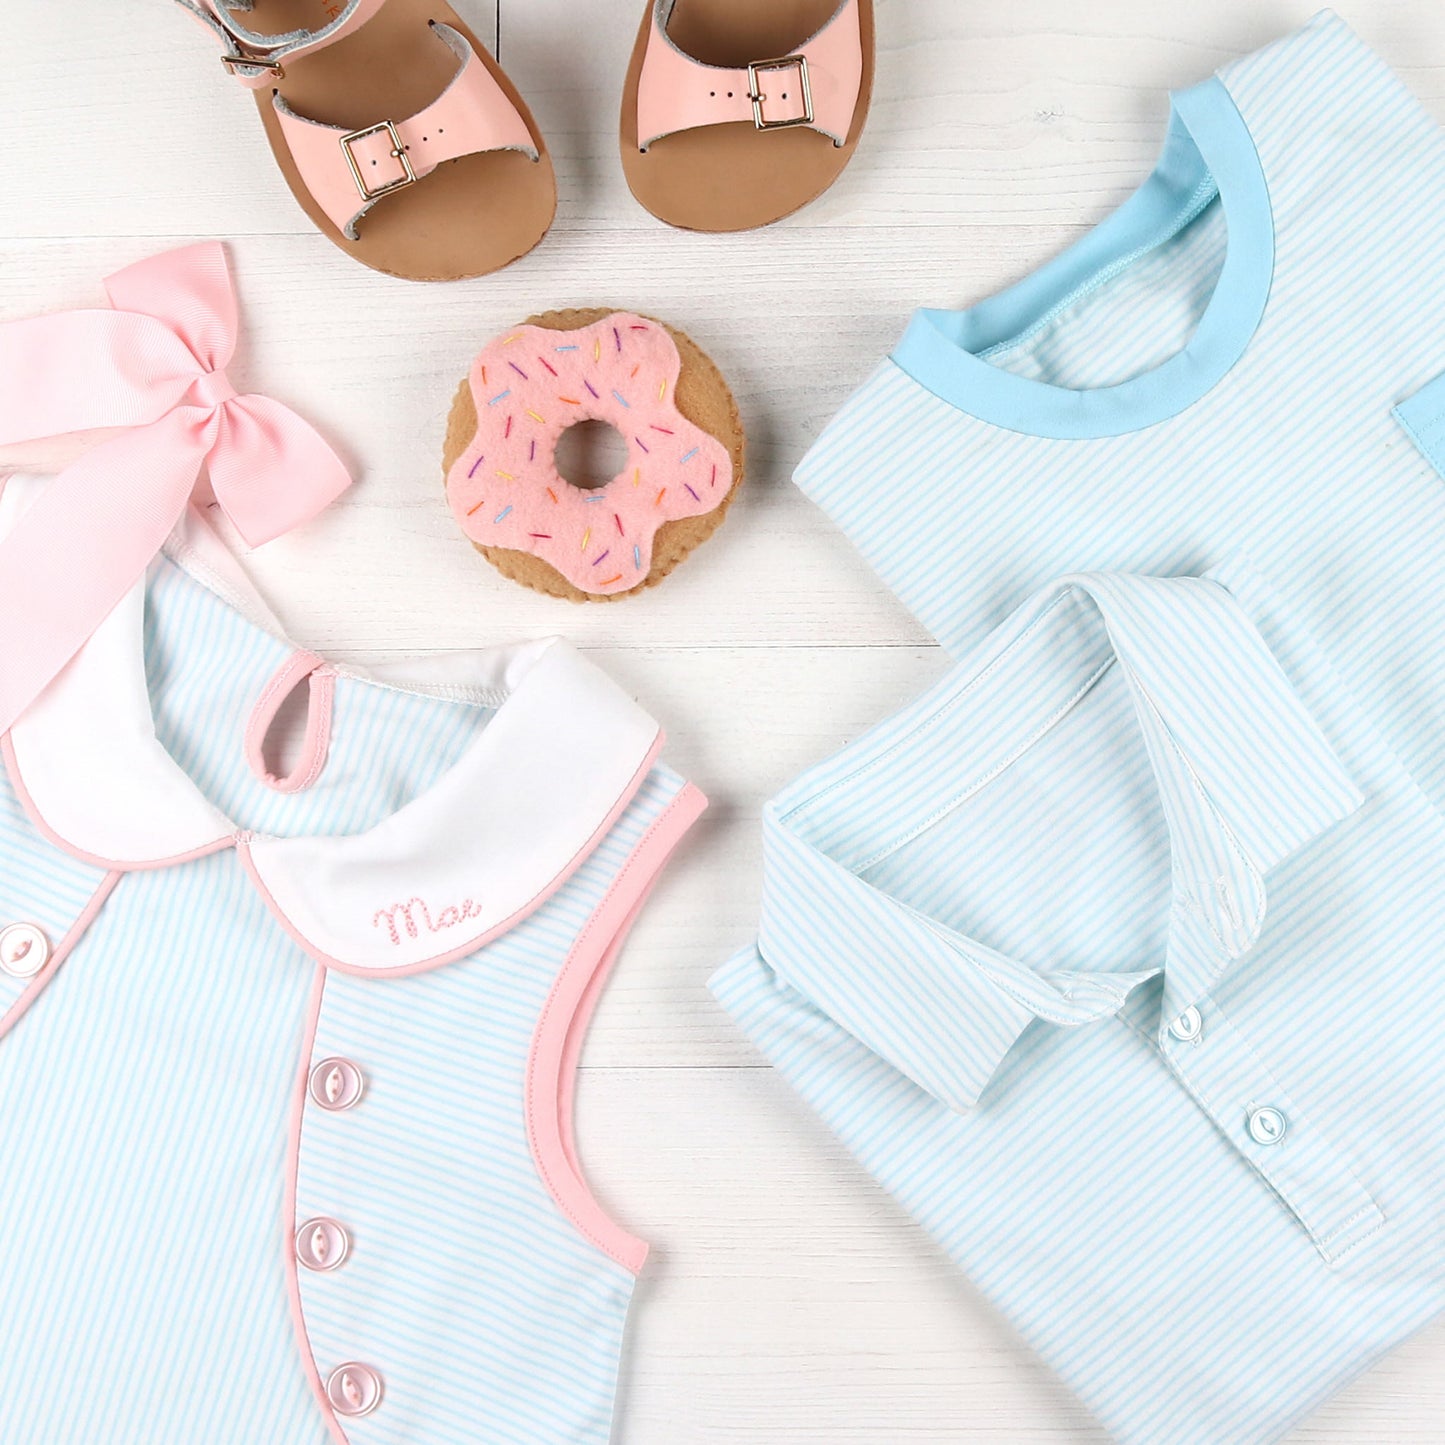 flat lay of pink sandals, dress, toy donute and light blue striped shirts